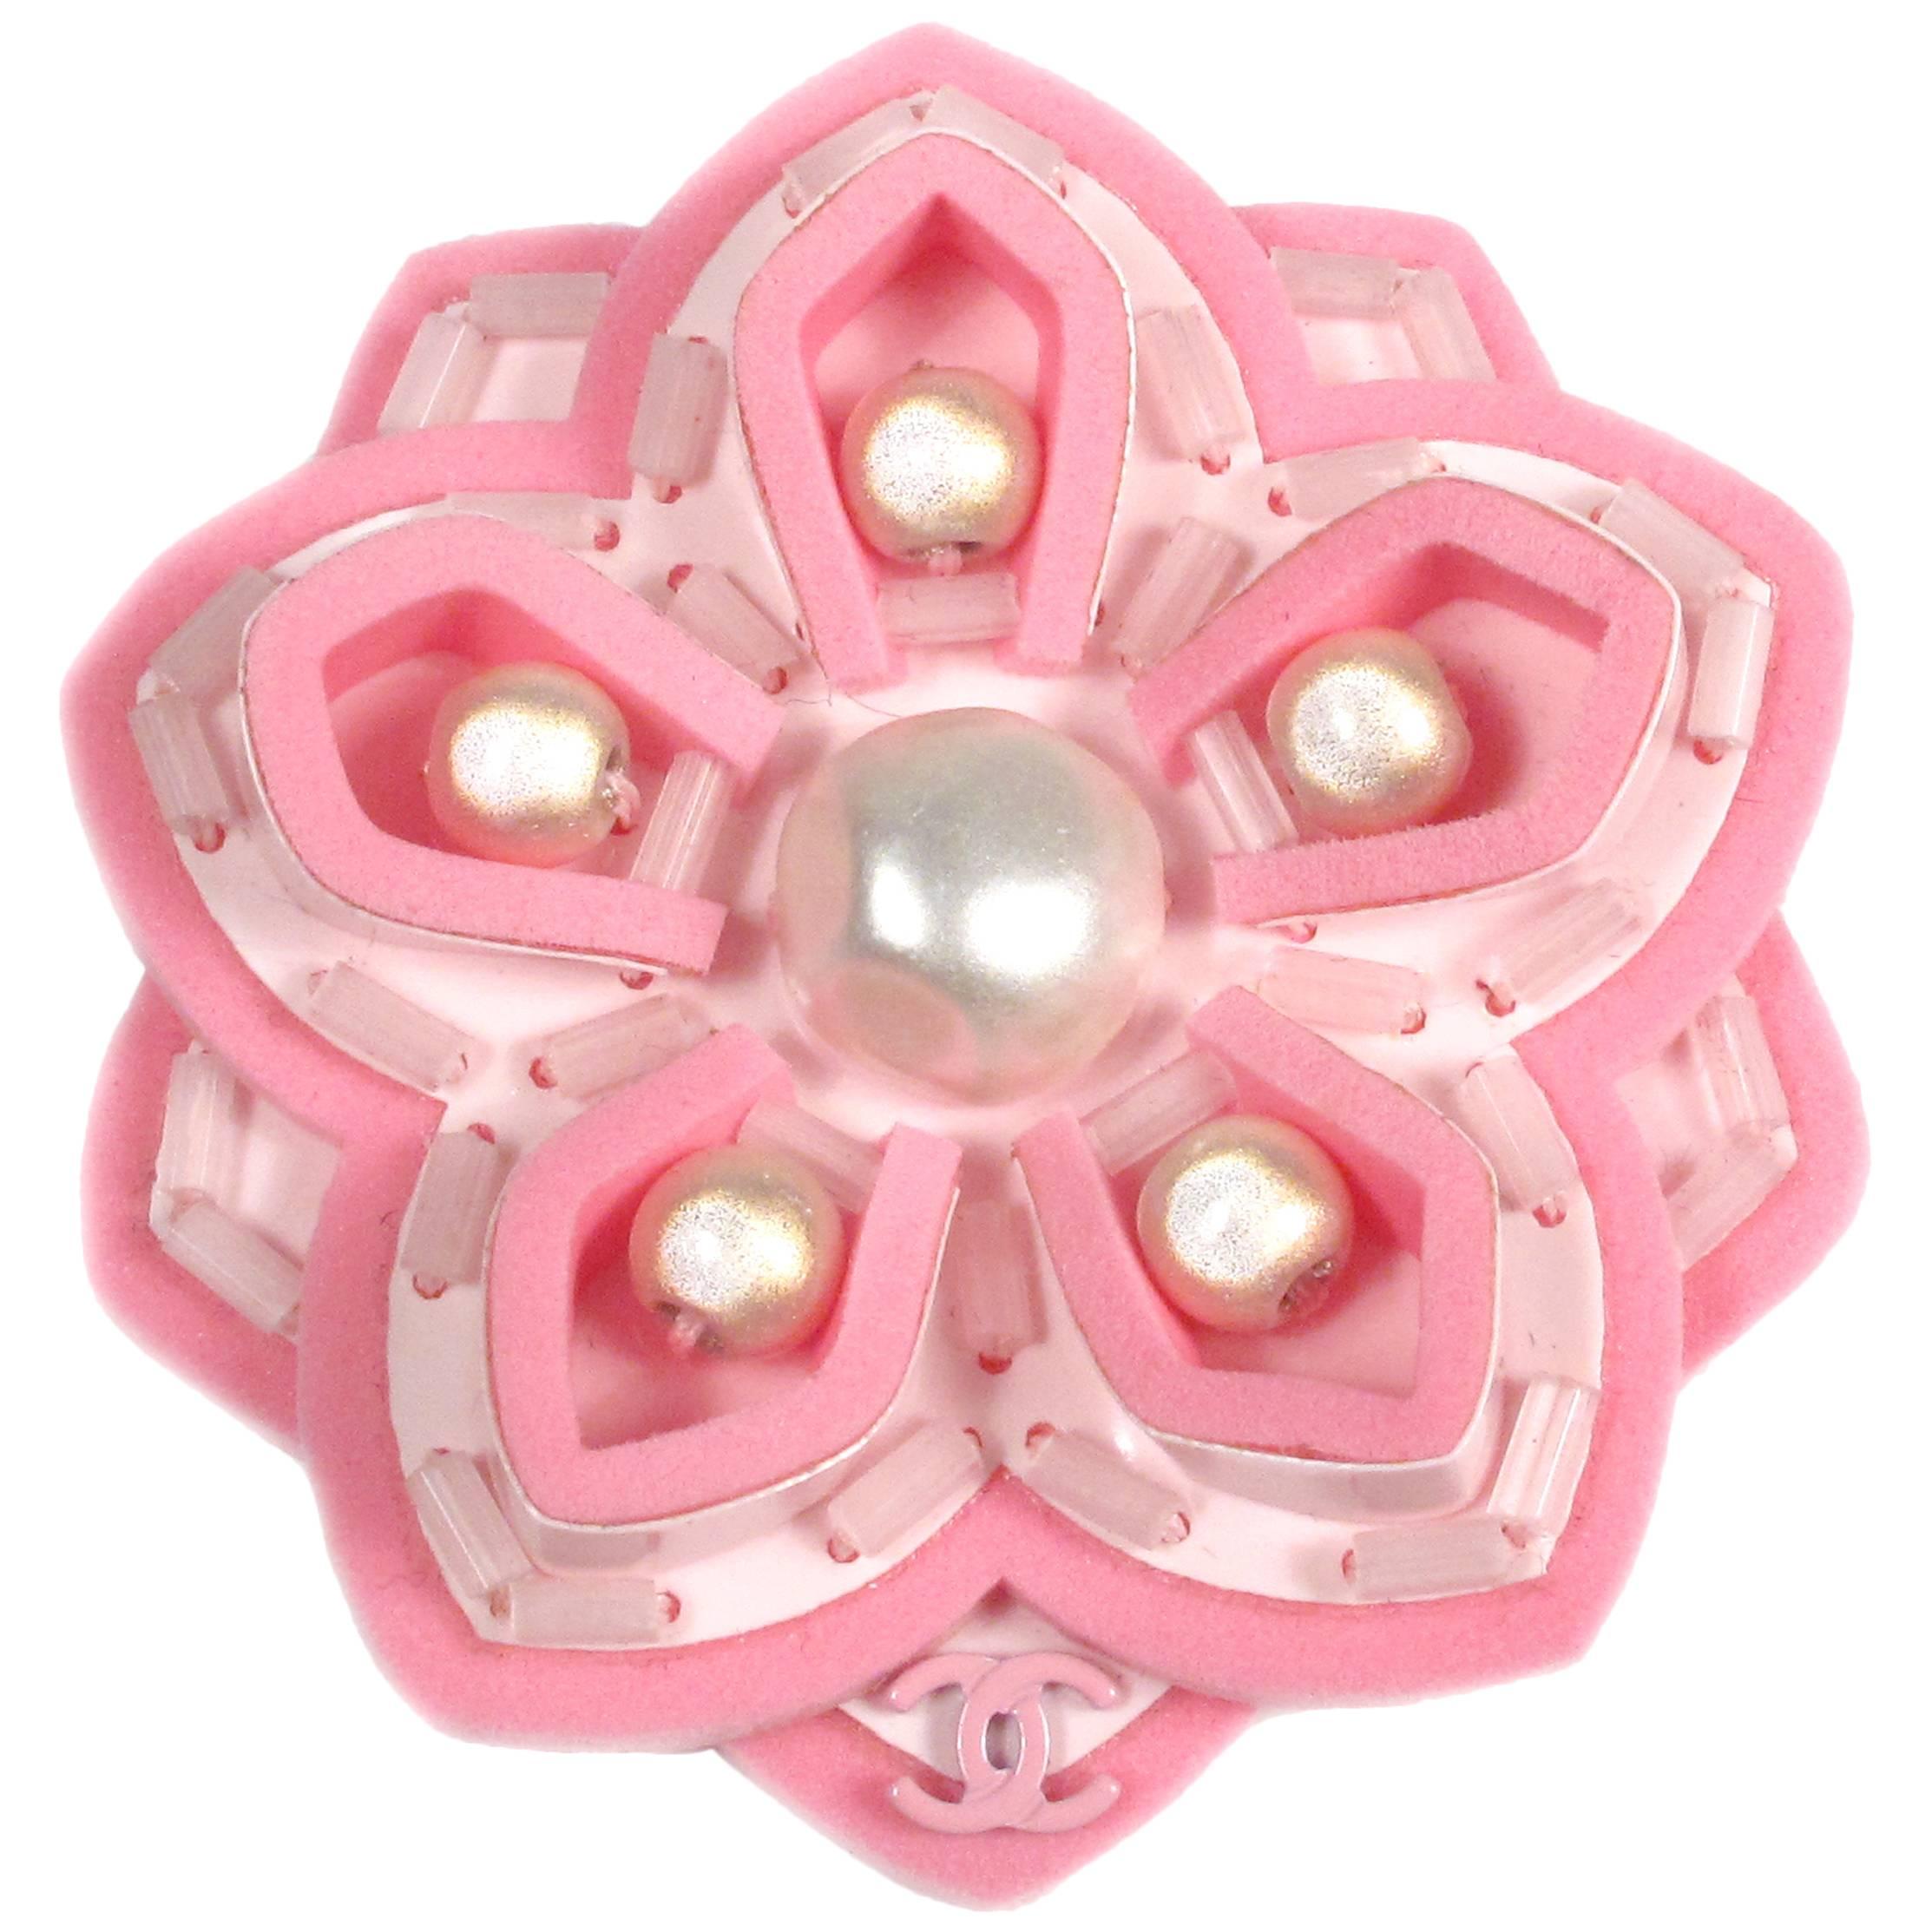 Chanel Camellia Pearl Pin - New - 2016 - Pink Brooch Silver Charm CC Logo 16C